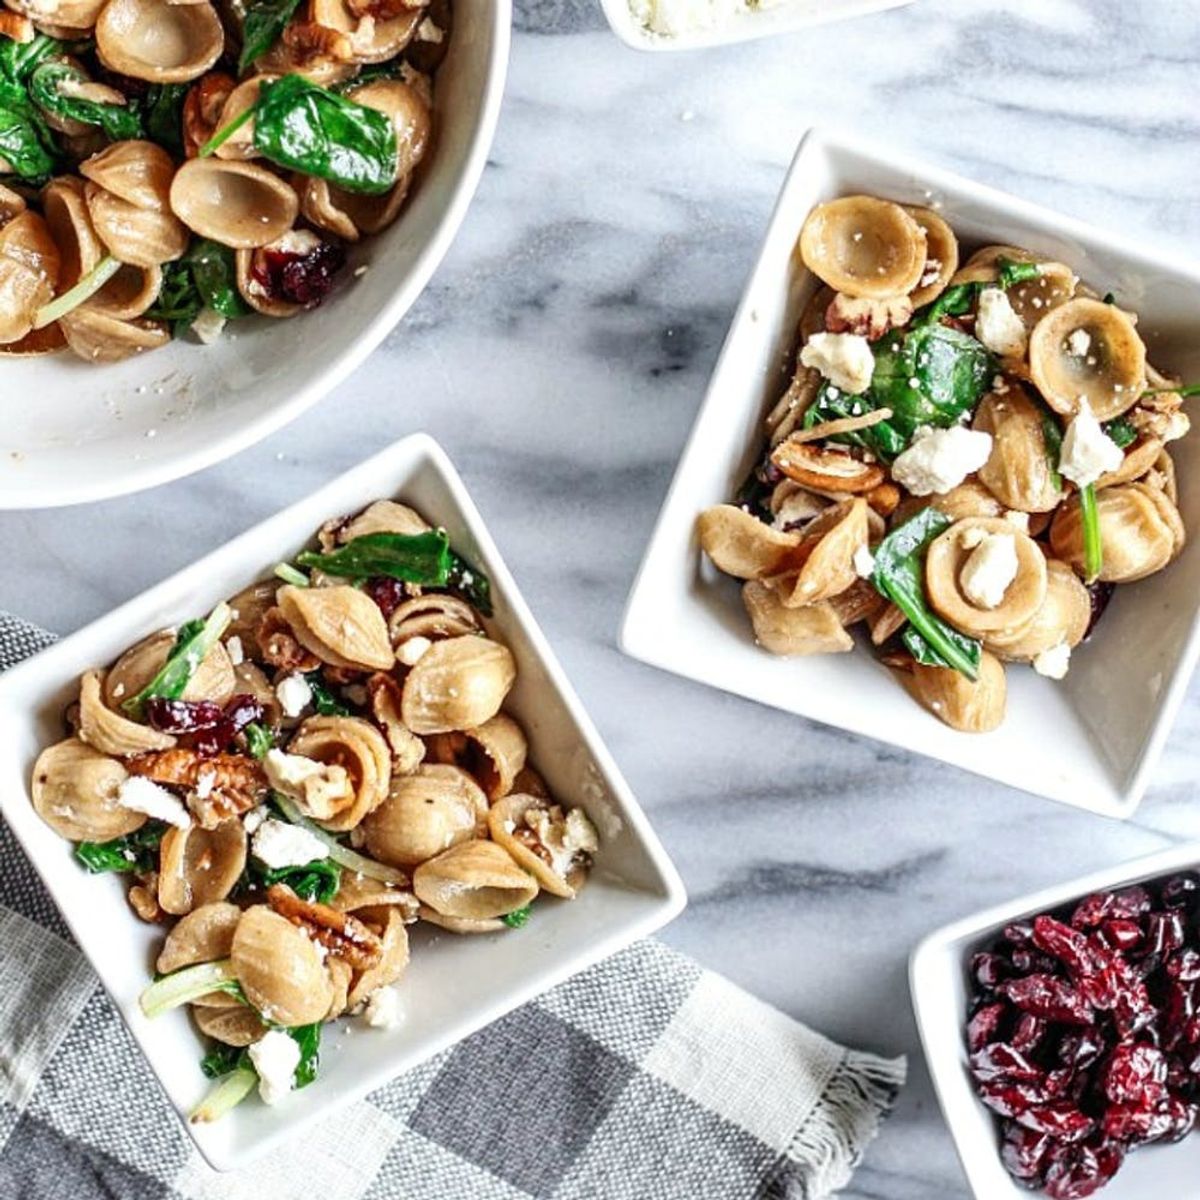 15 Romantically Simple Pasta Dinners That Scream “That’s Amore!”